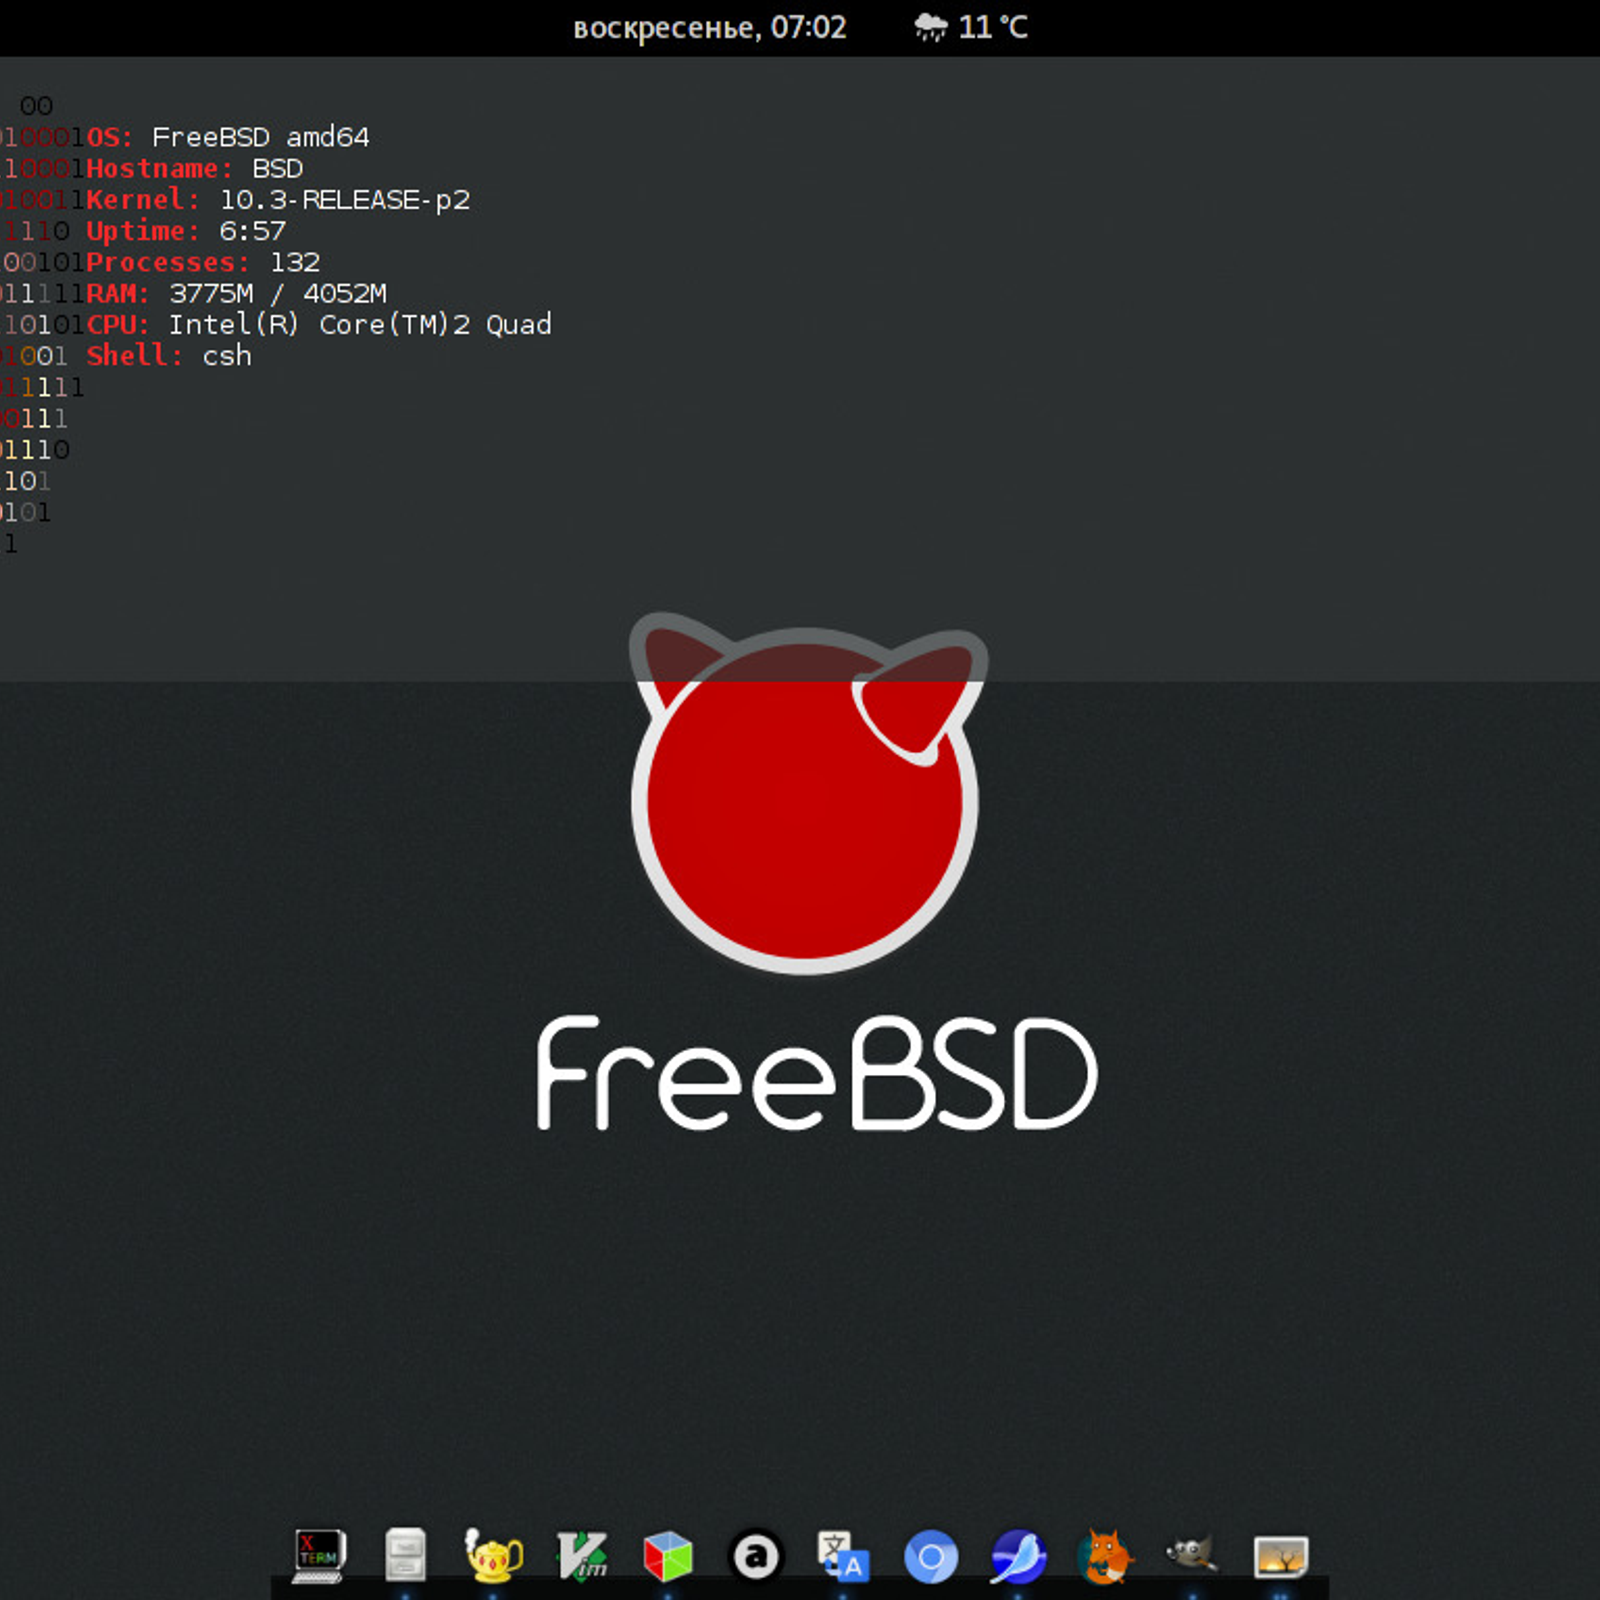 freebsd_481133_full.png